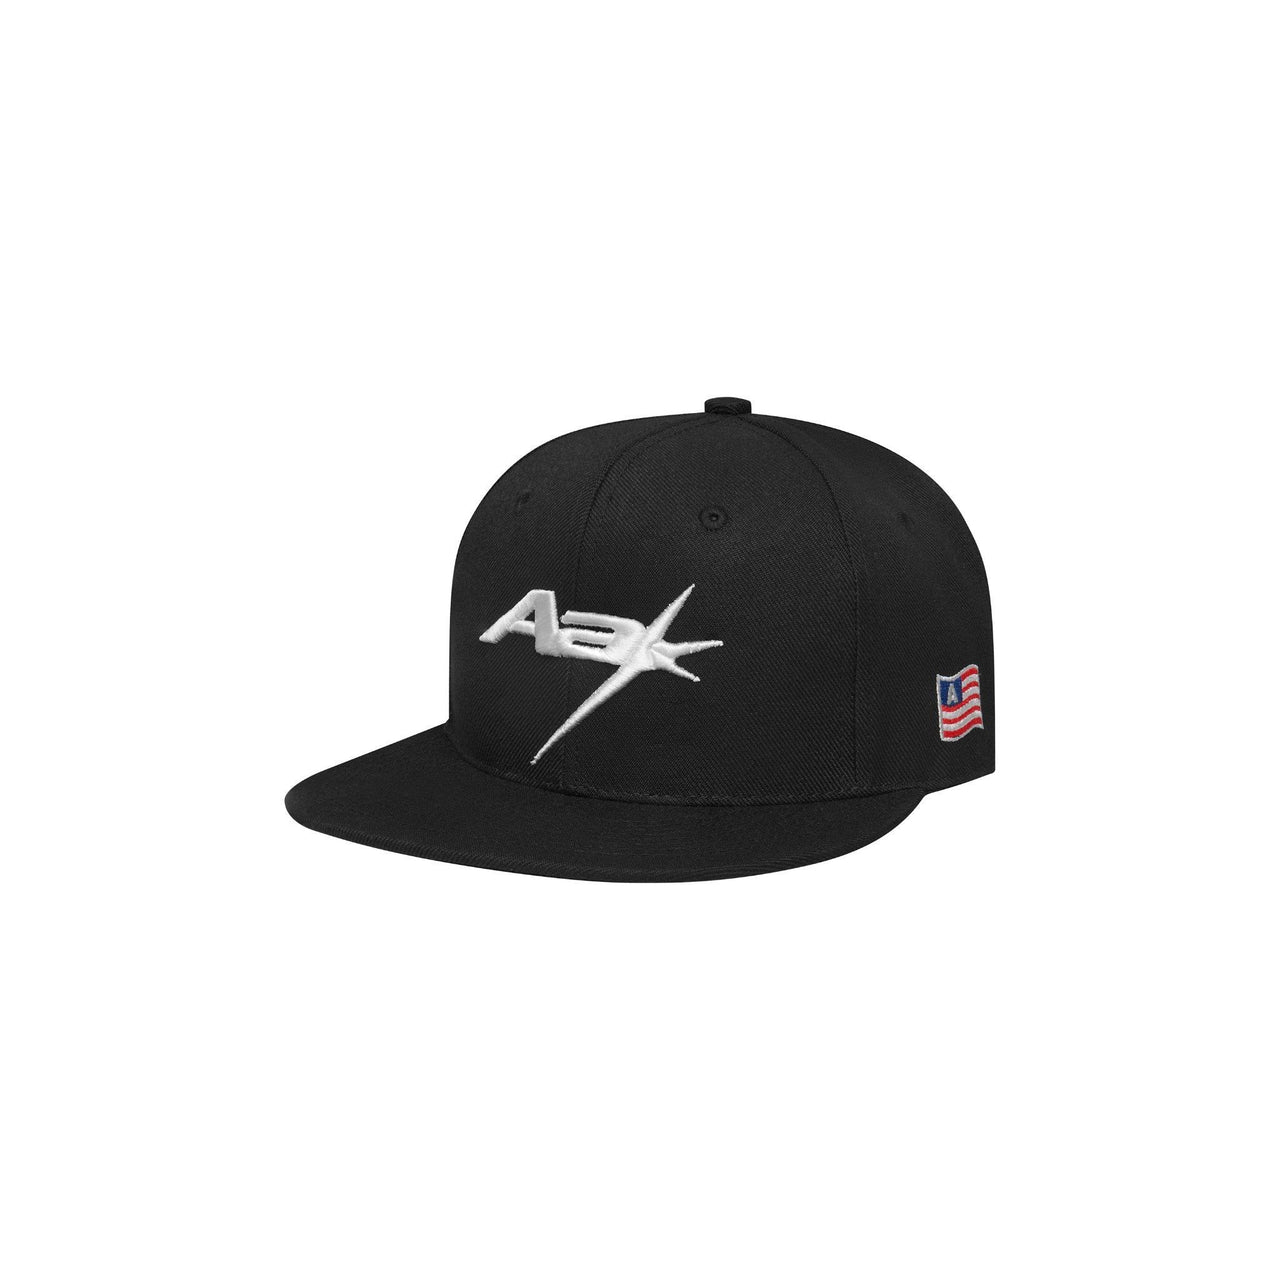 AA Racing Logo Fitted - Black